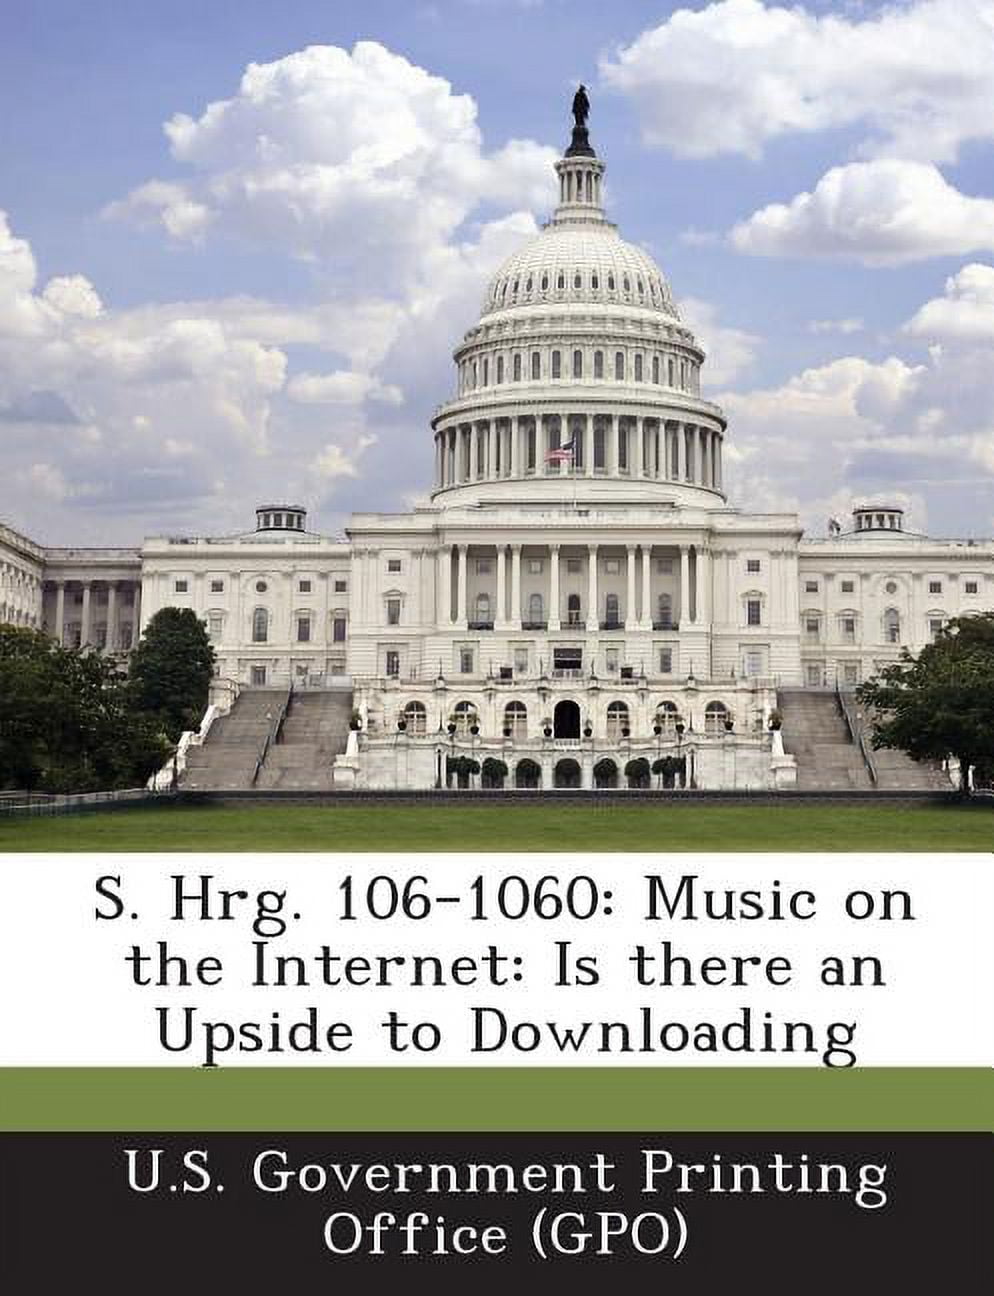 S. Hrg. 106-1060 : Music on the Internet: Is There an Upside to